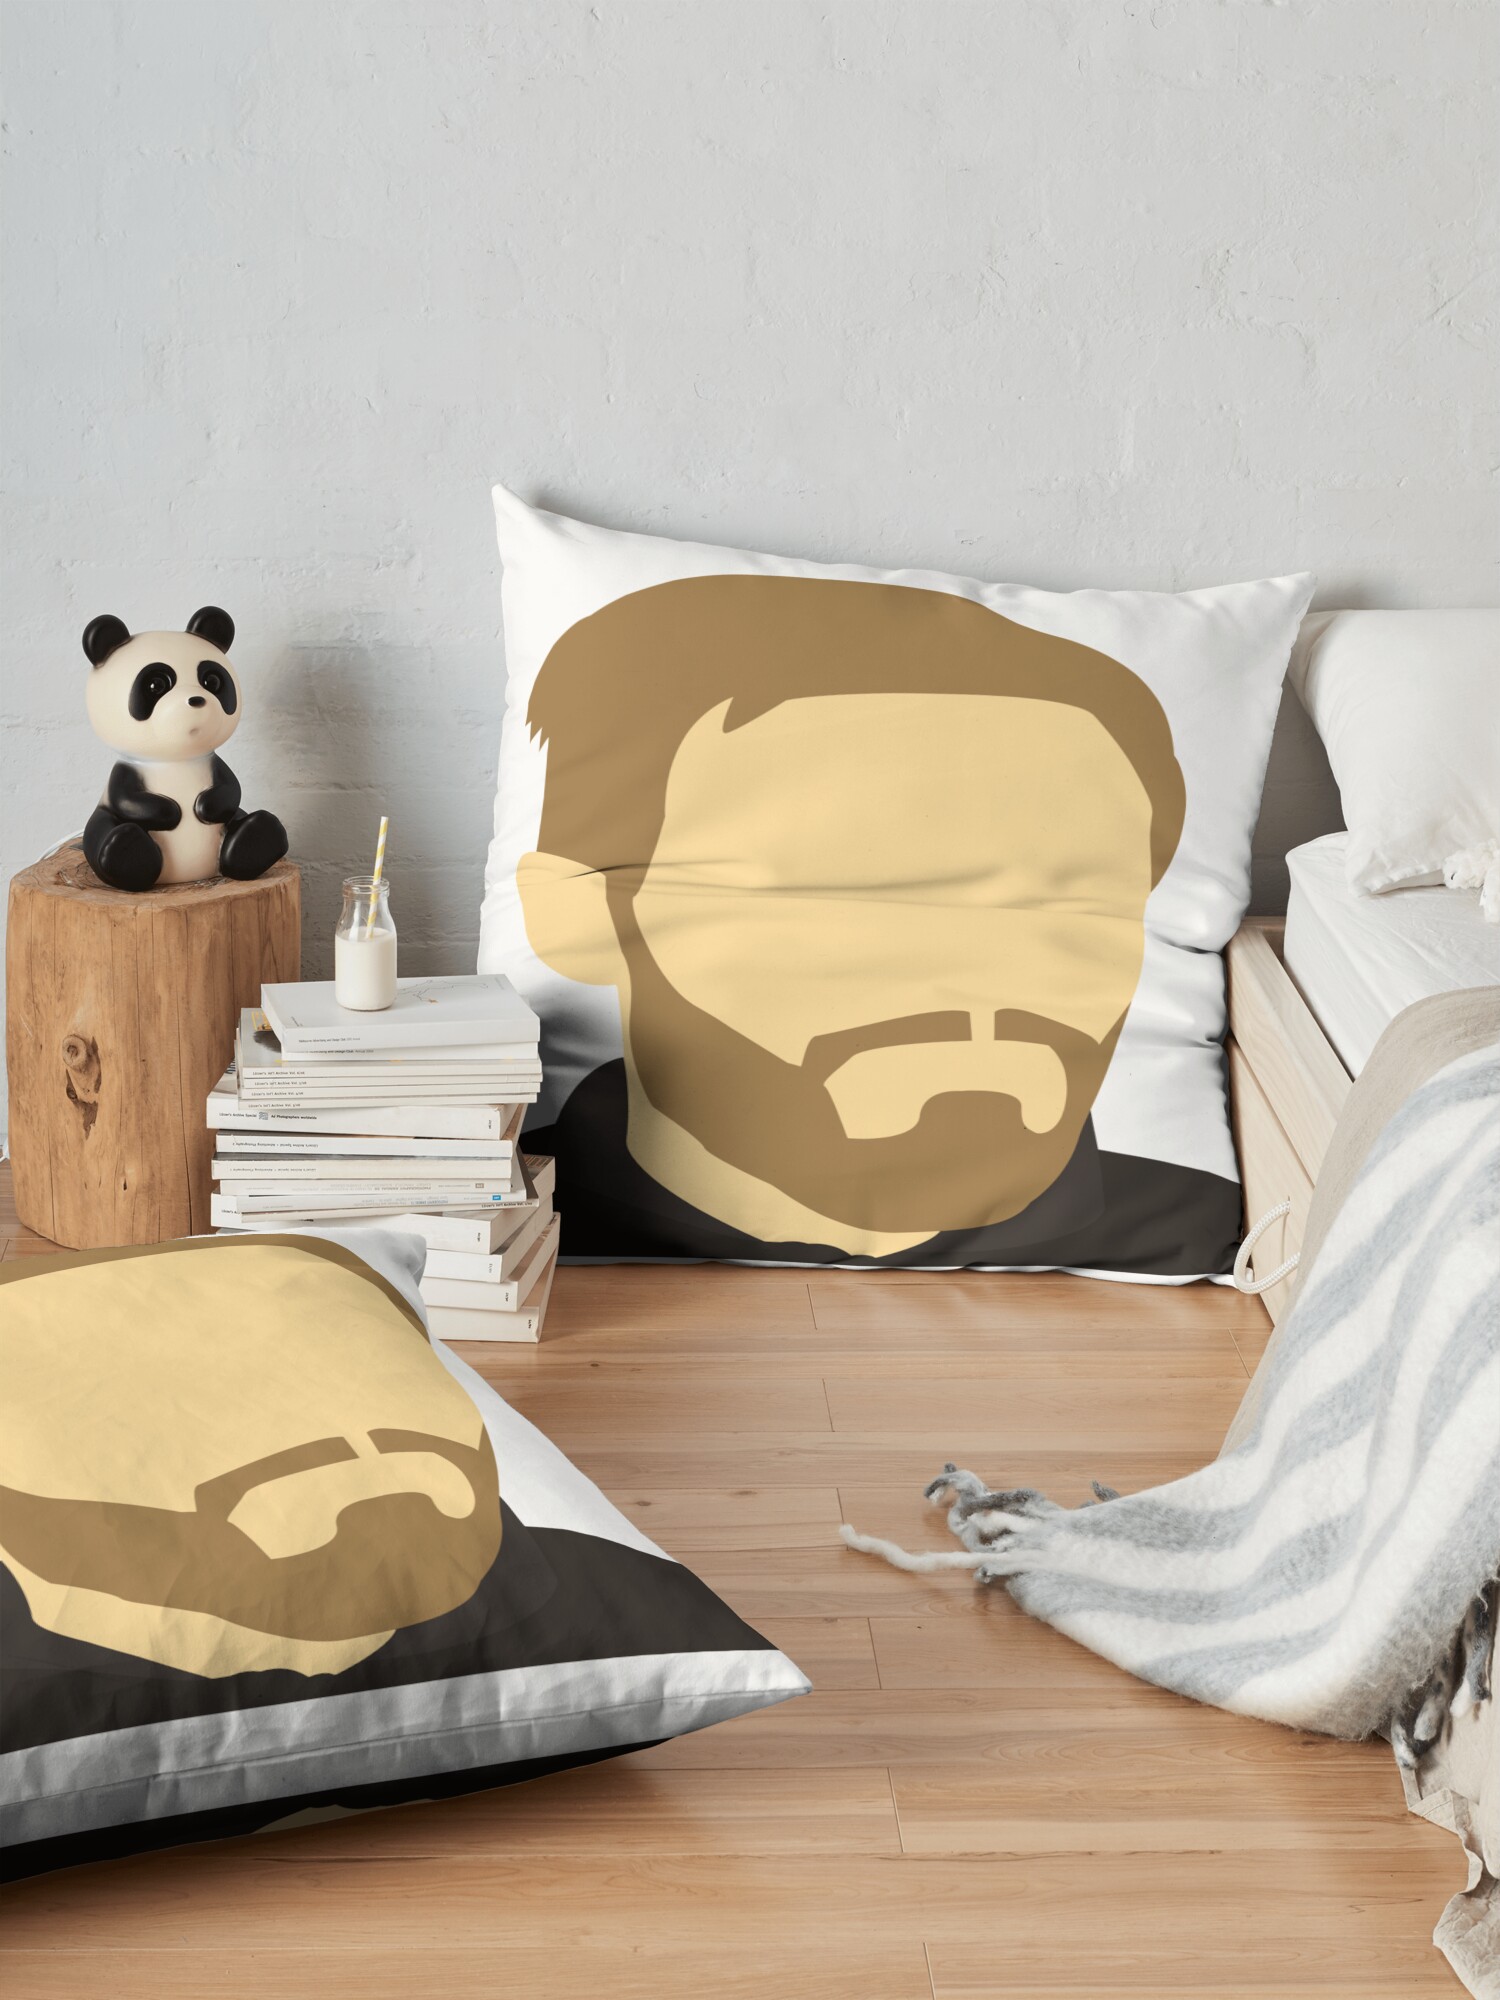 throwpillowsecondary 36x362000x2000 bgf8f8f8 9 - Pewdiepie Store